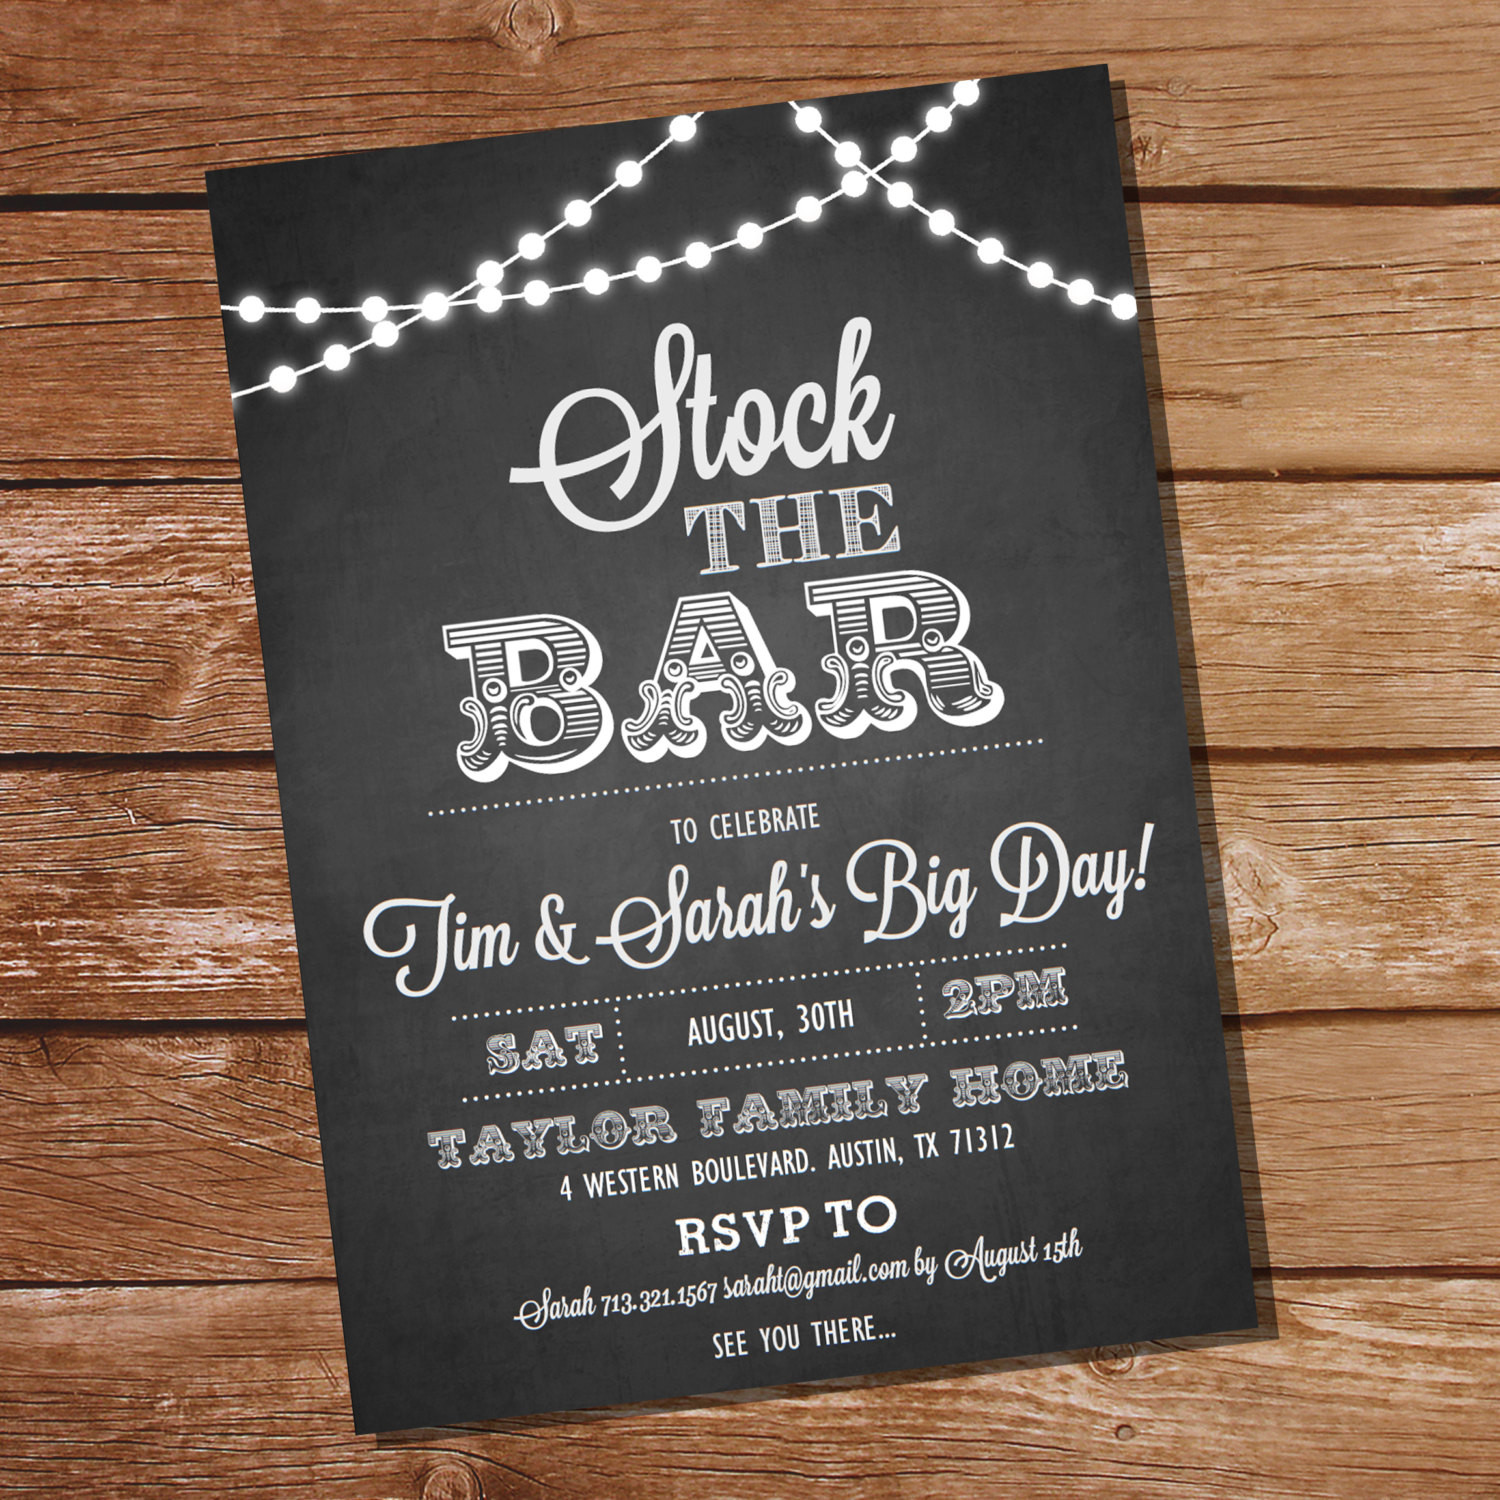 Stock The Bar Engagement Party Ideas
 Chalkboard Stock The Bar Engagement Party Invitation Stock